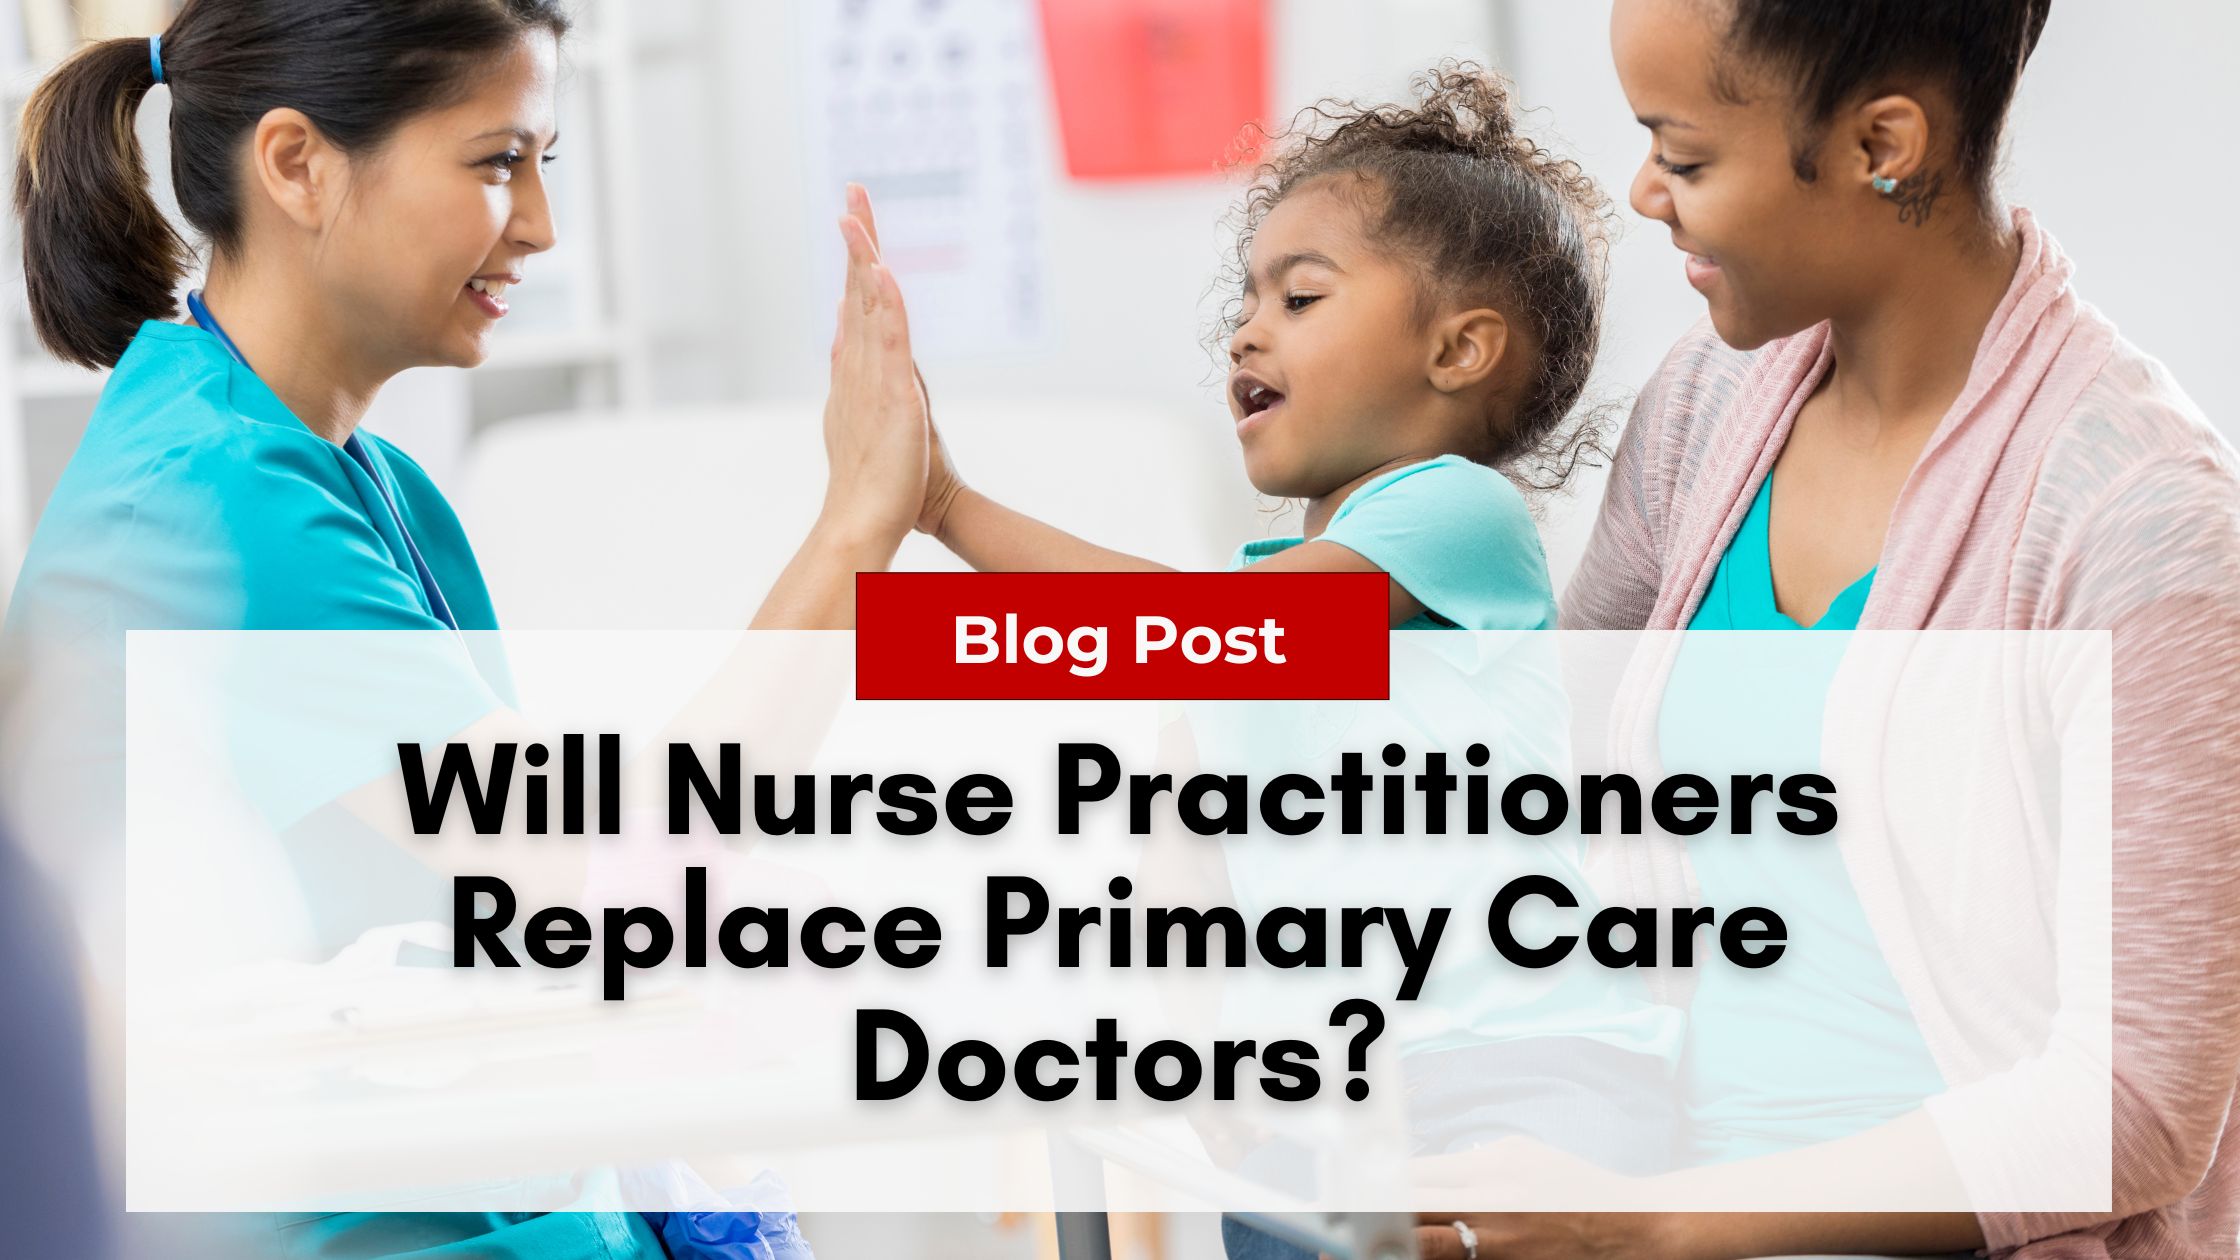 A nurse practitioner and a child high-five while a woman watches. Text overlay reads: "Blog Post: Will Nurse Practitioners Replace Primary Care Doctors? Addressing Nurse Practitioner Burnout.